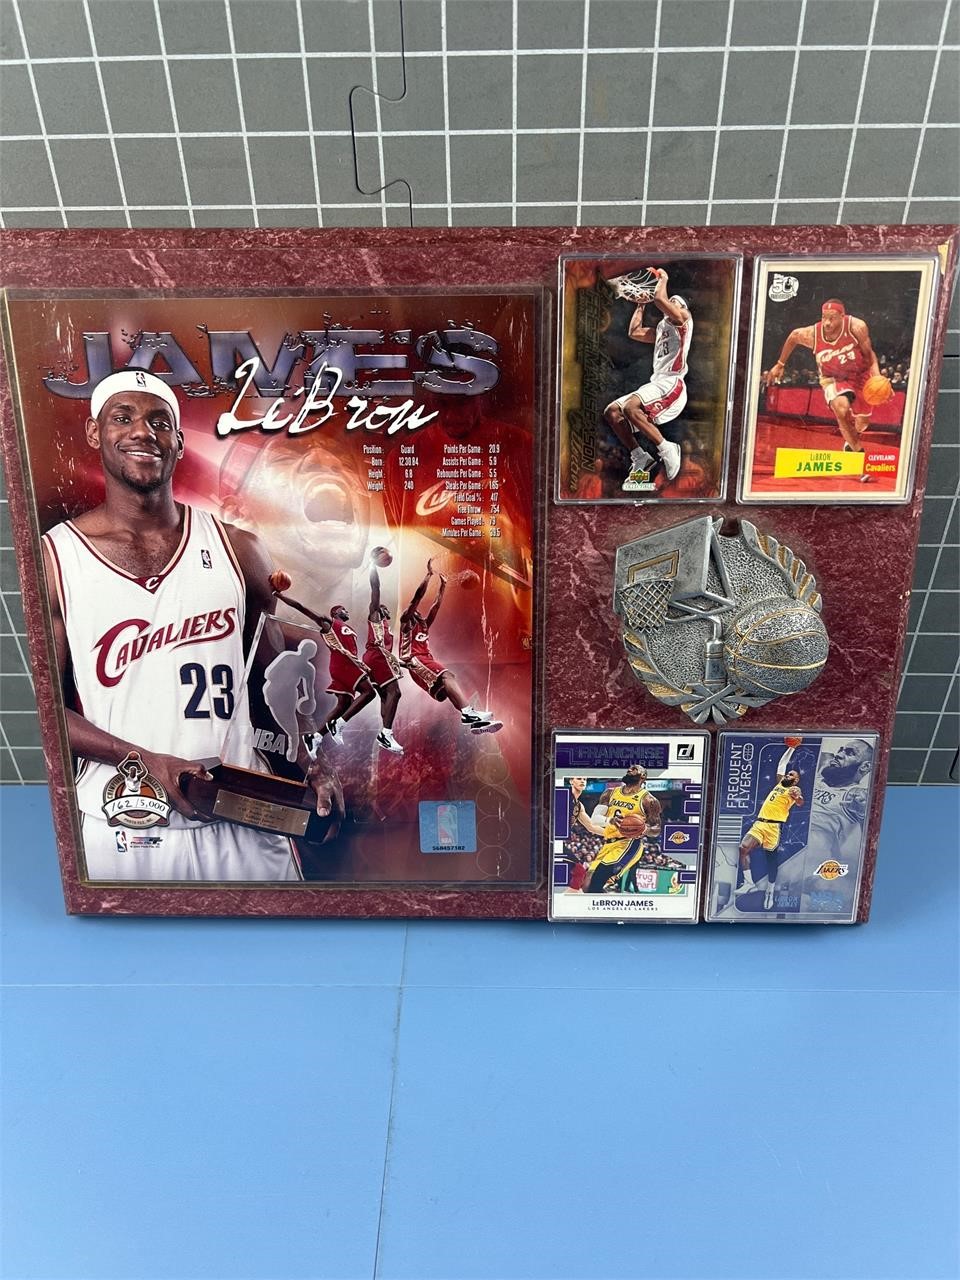 JAMES LEBRON SPORTS CARDS MOUNTED